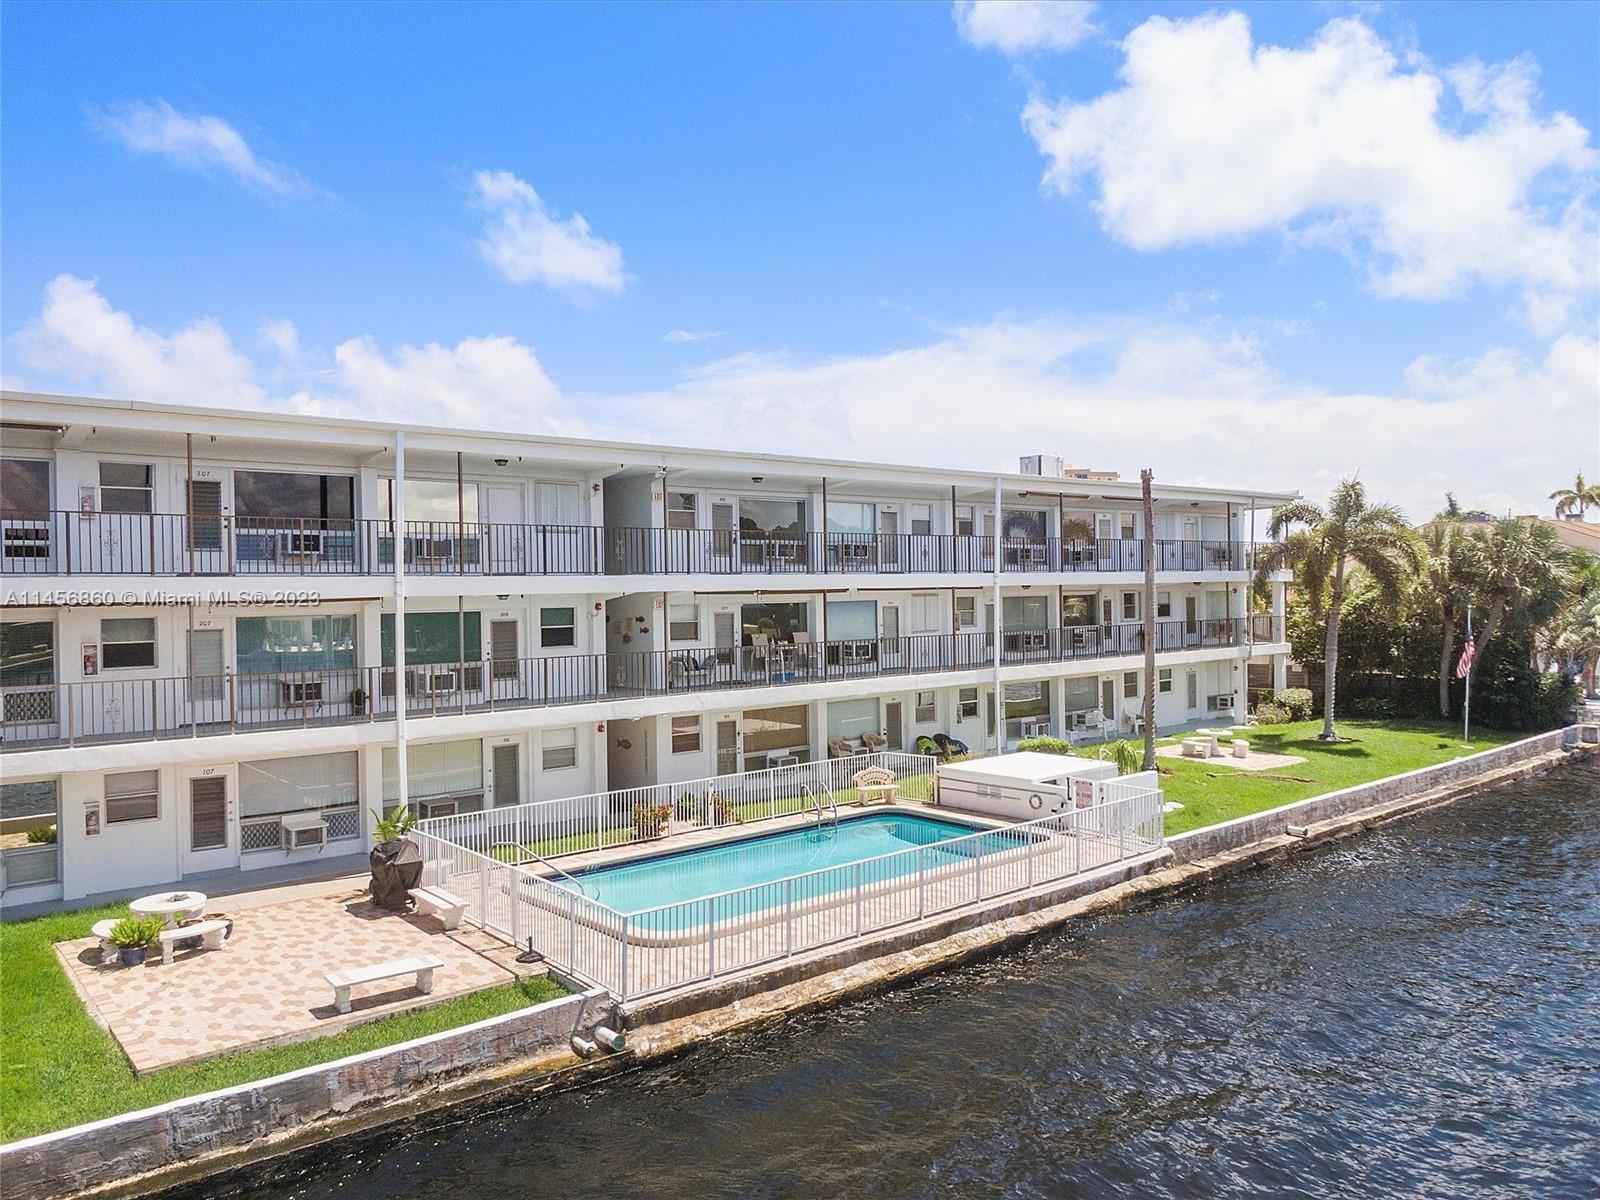 Stunning Intracoastal views from your main living room, watch the boats go by and enjoy Florida suns